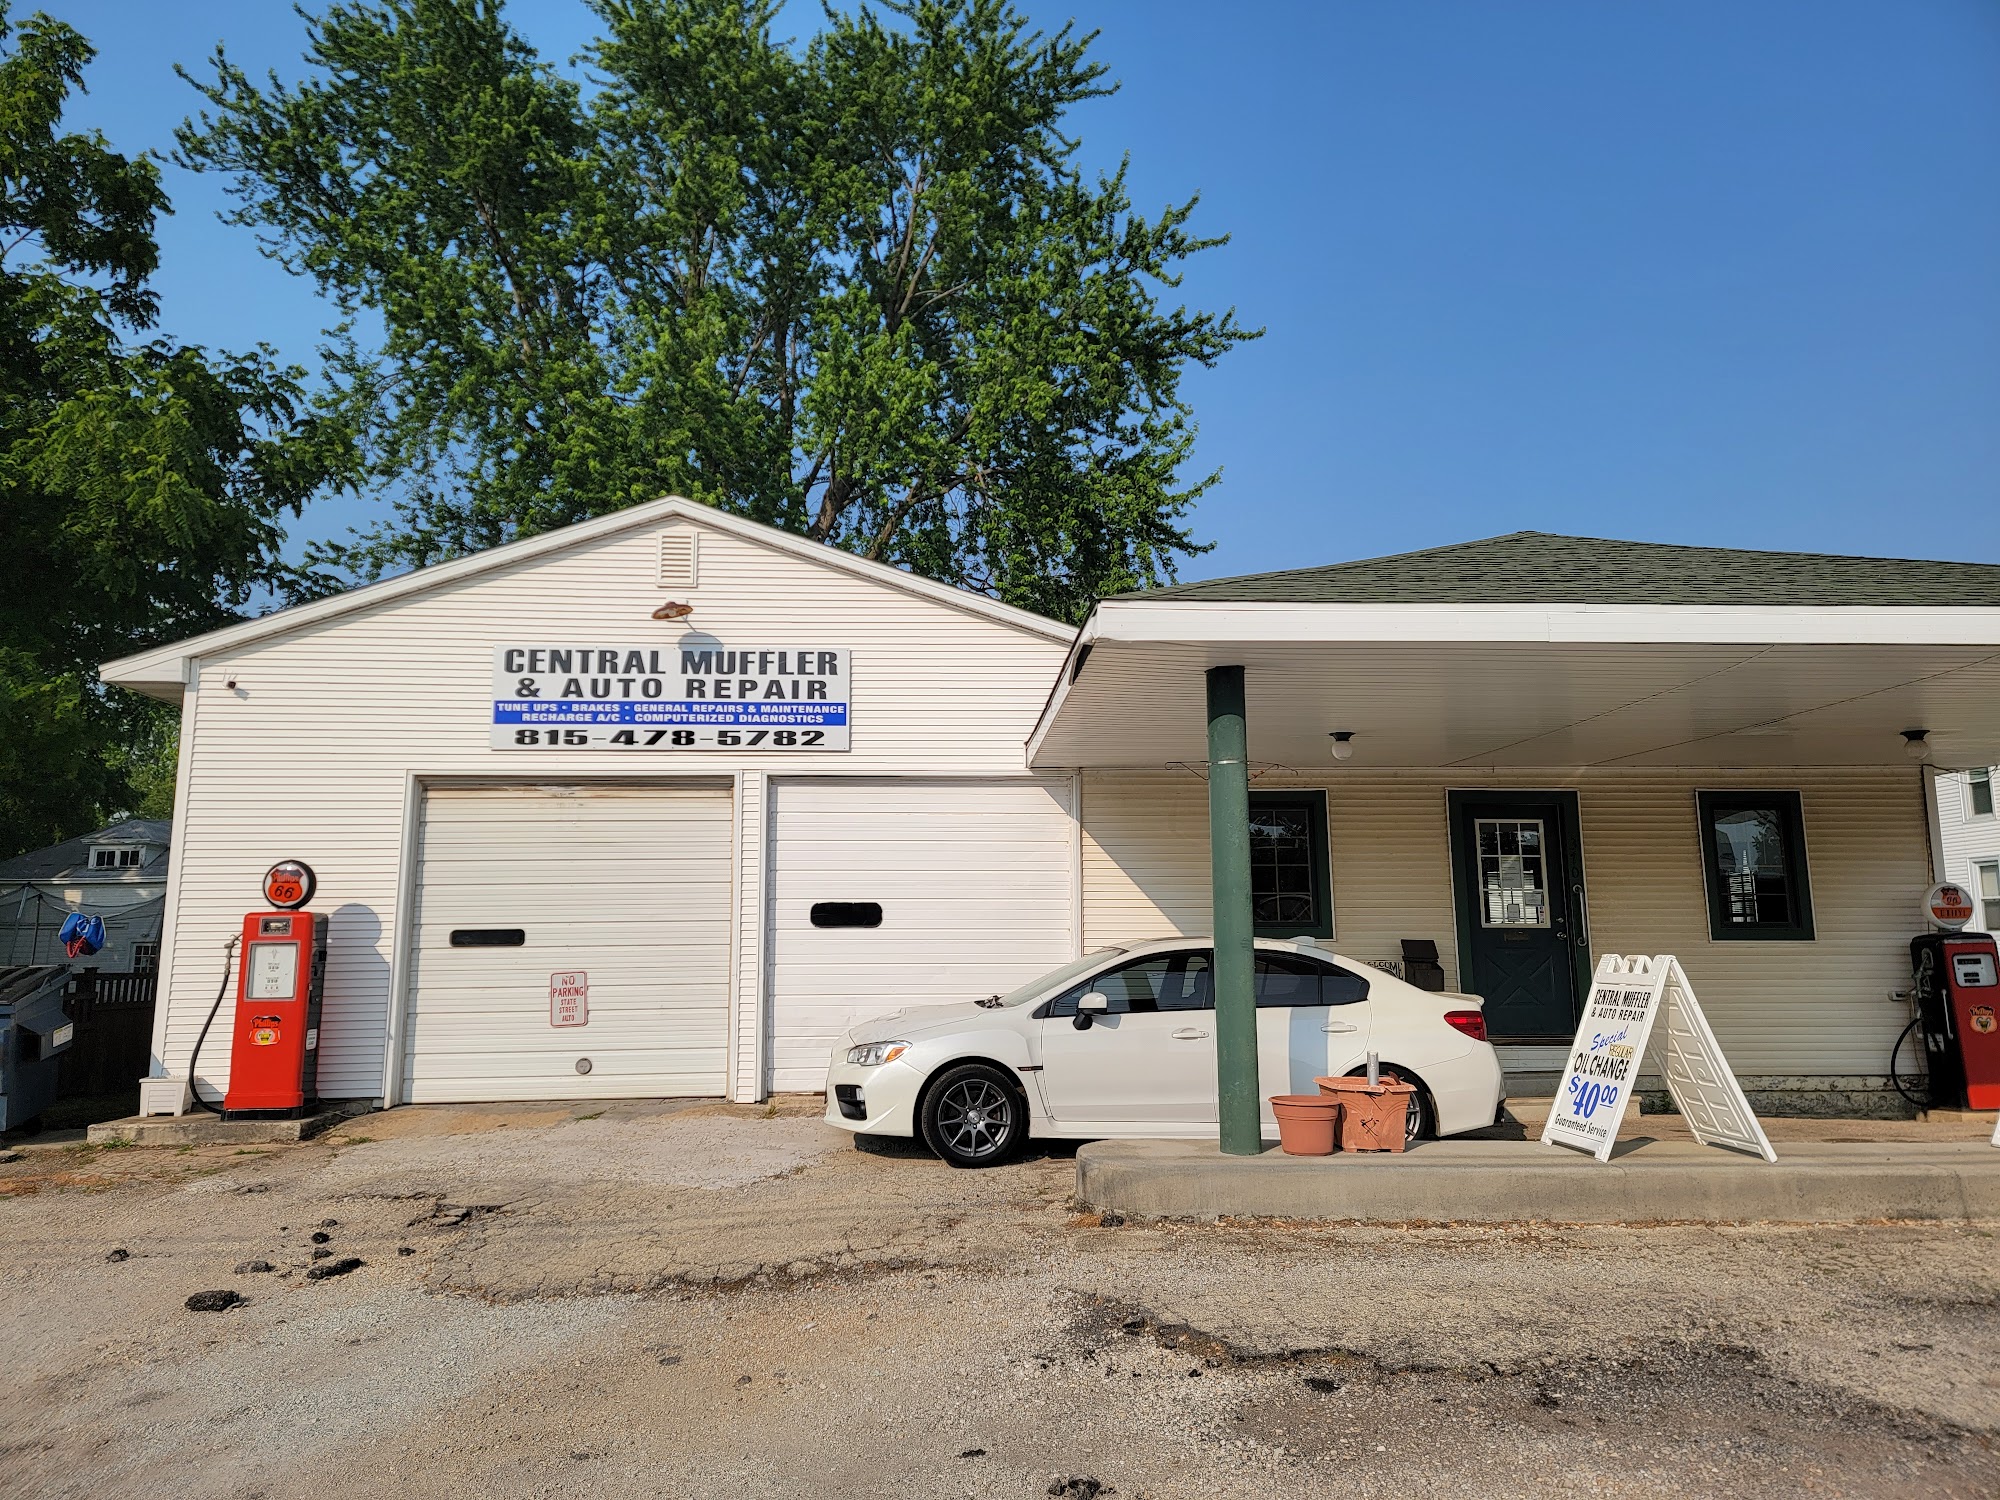 Central Mufflers Complete Auto Repair